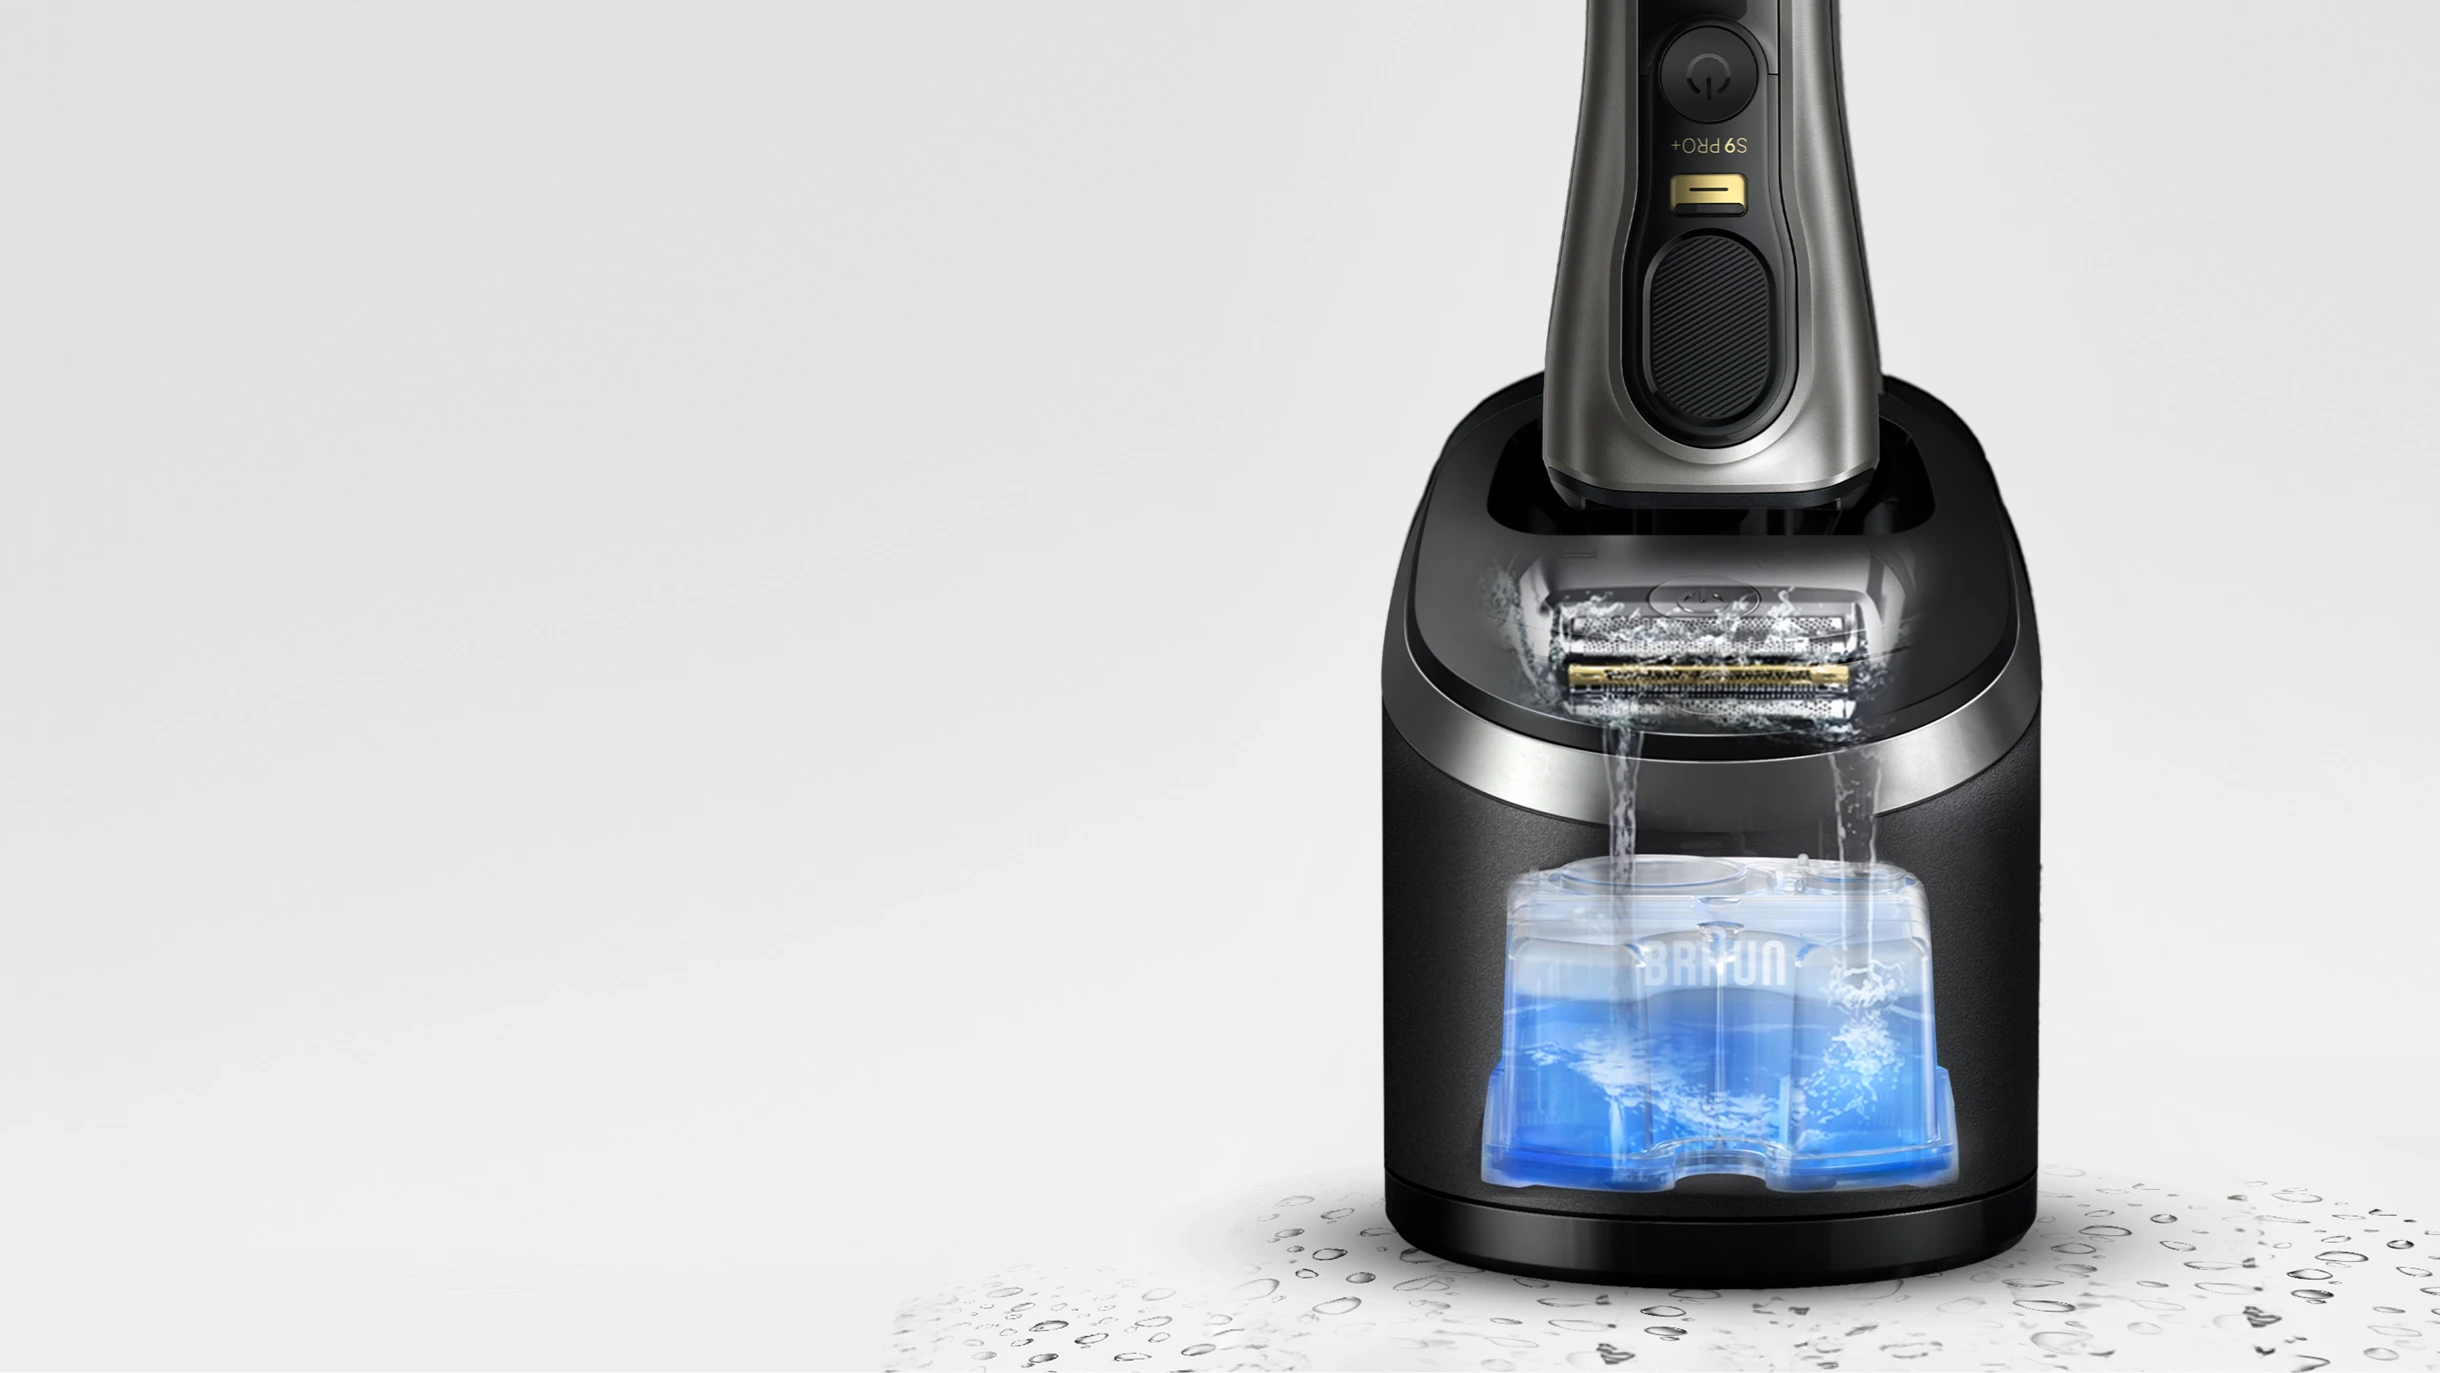 Profile of the SmartCare center with cartridge that cleans the Series 9 Pro+ shaver